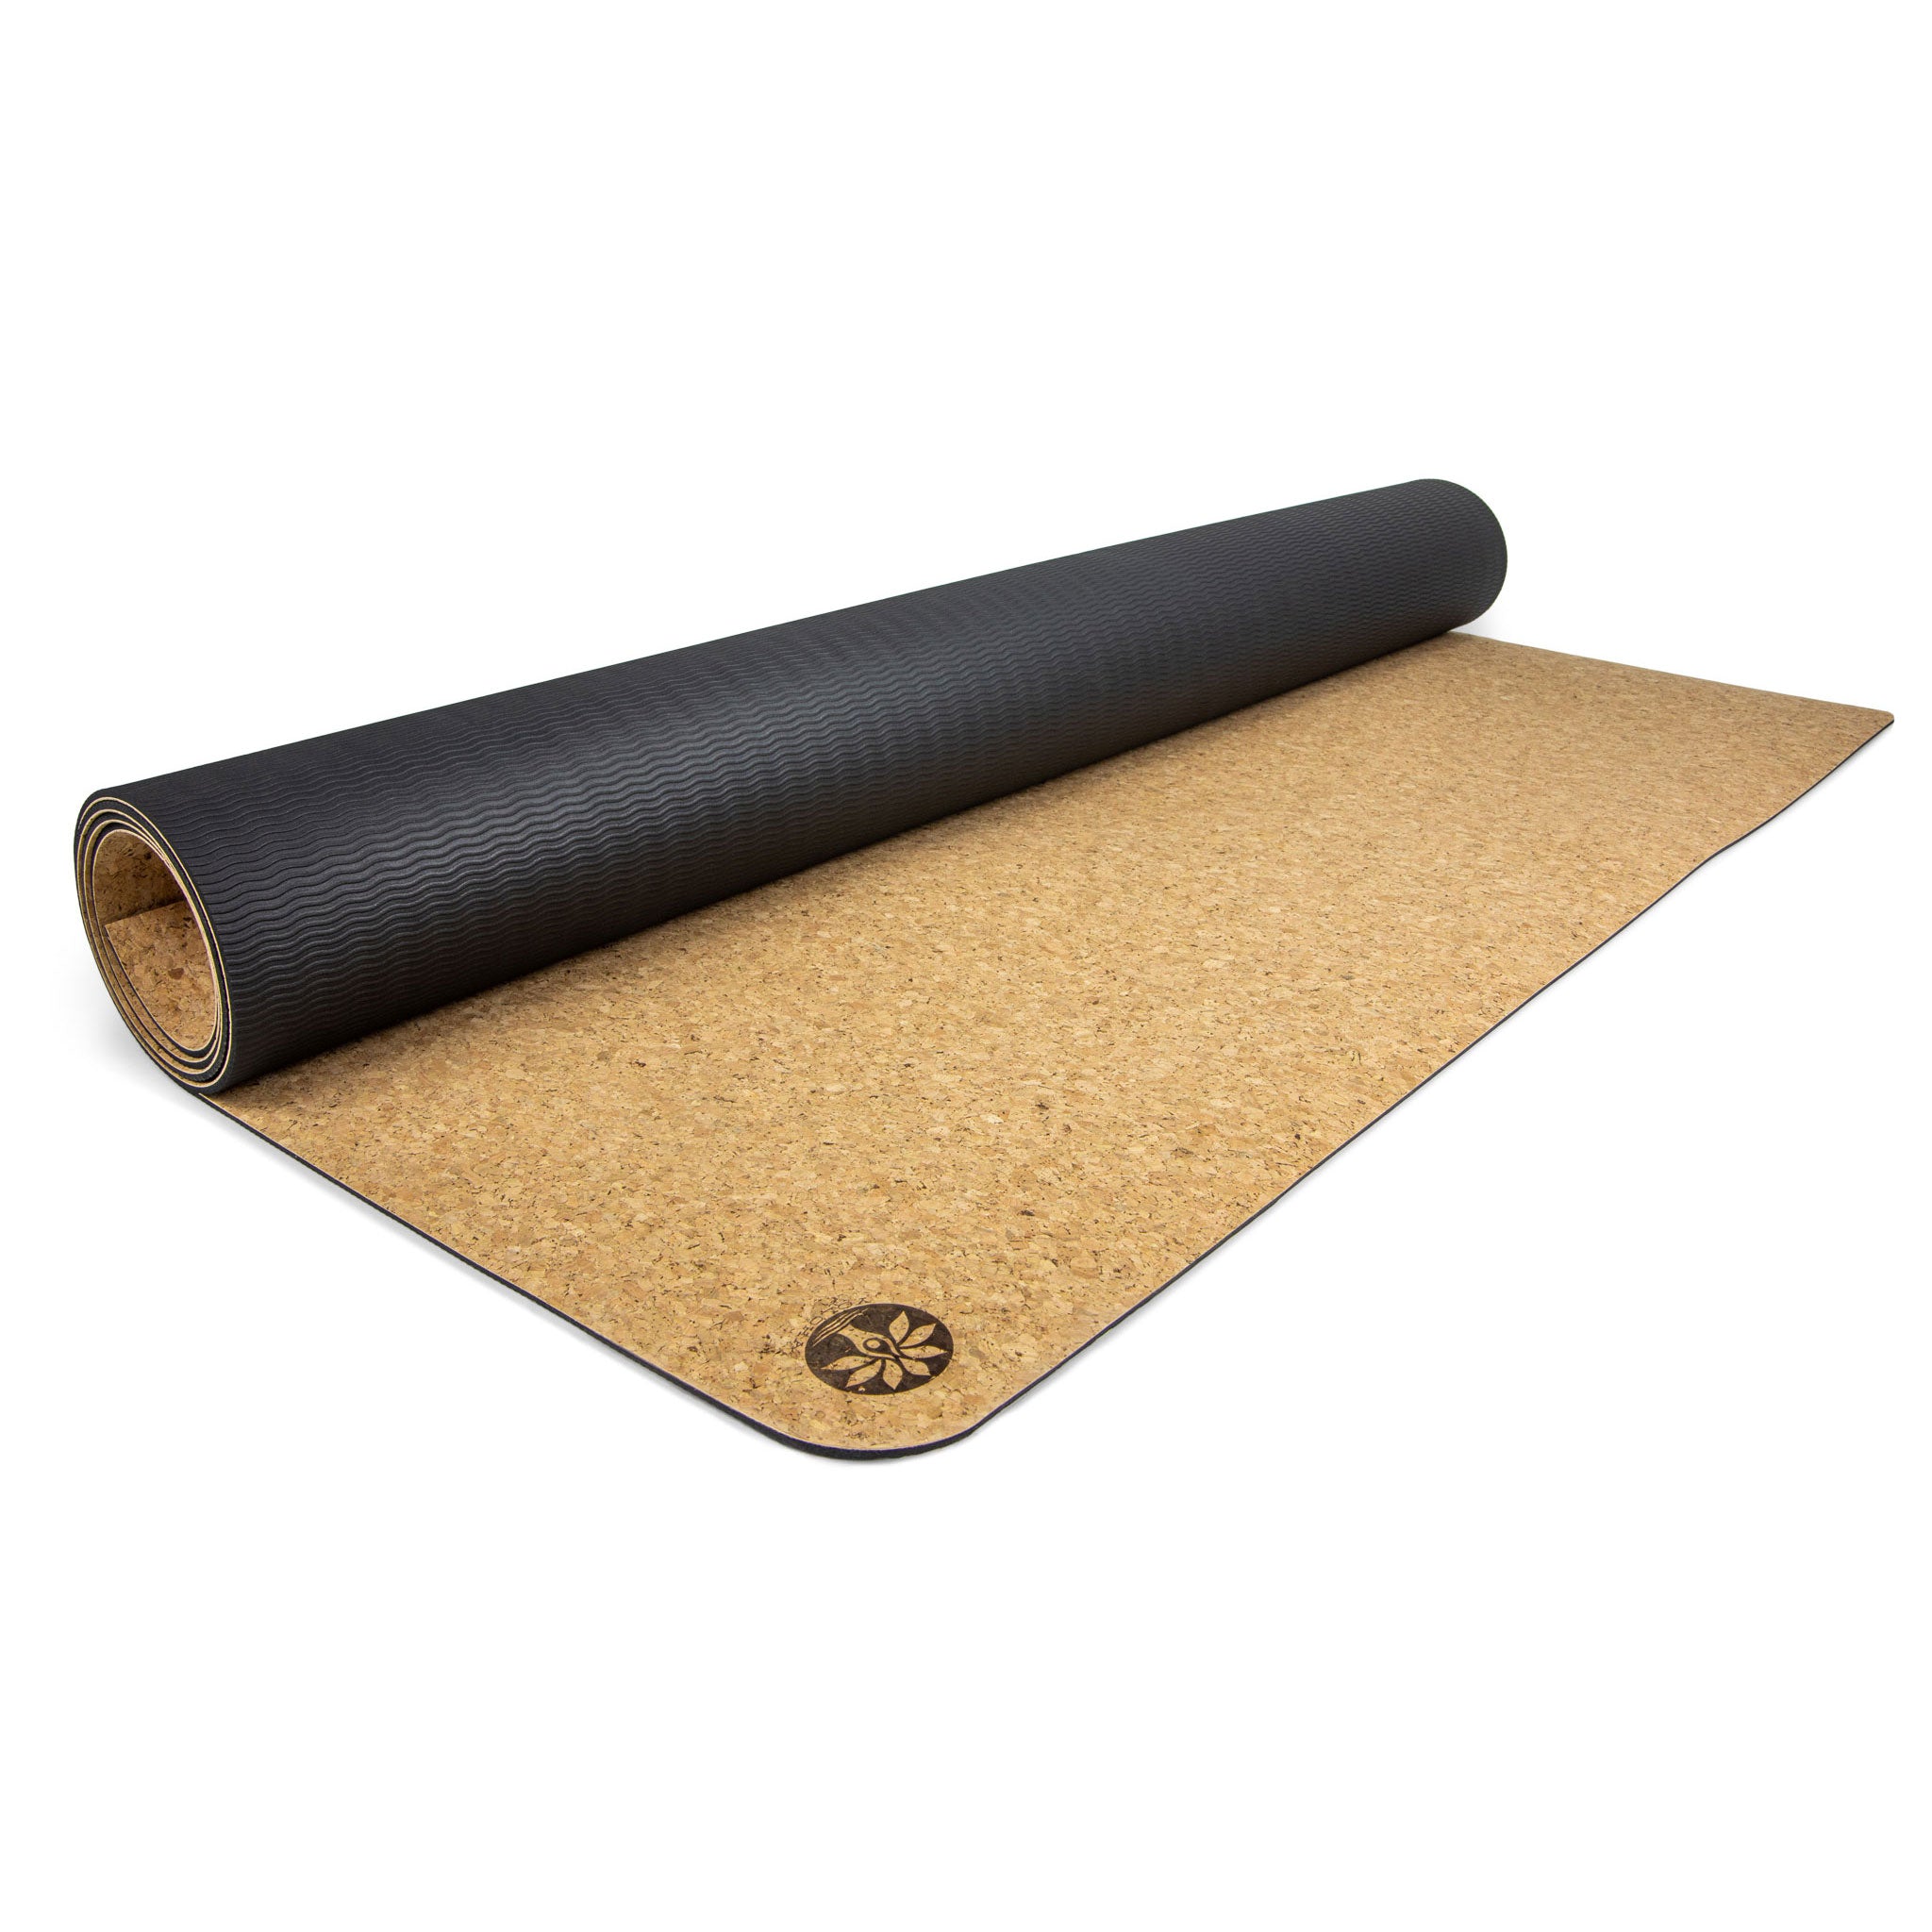 Proyog Extra Grip Yoga Travel Mat Natural Cotton and Rubber I Kochi Ma